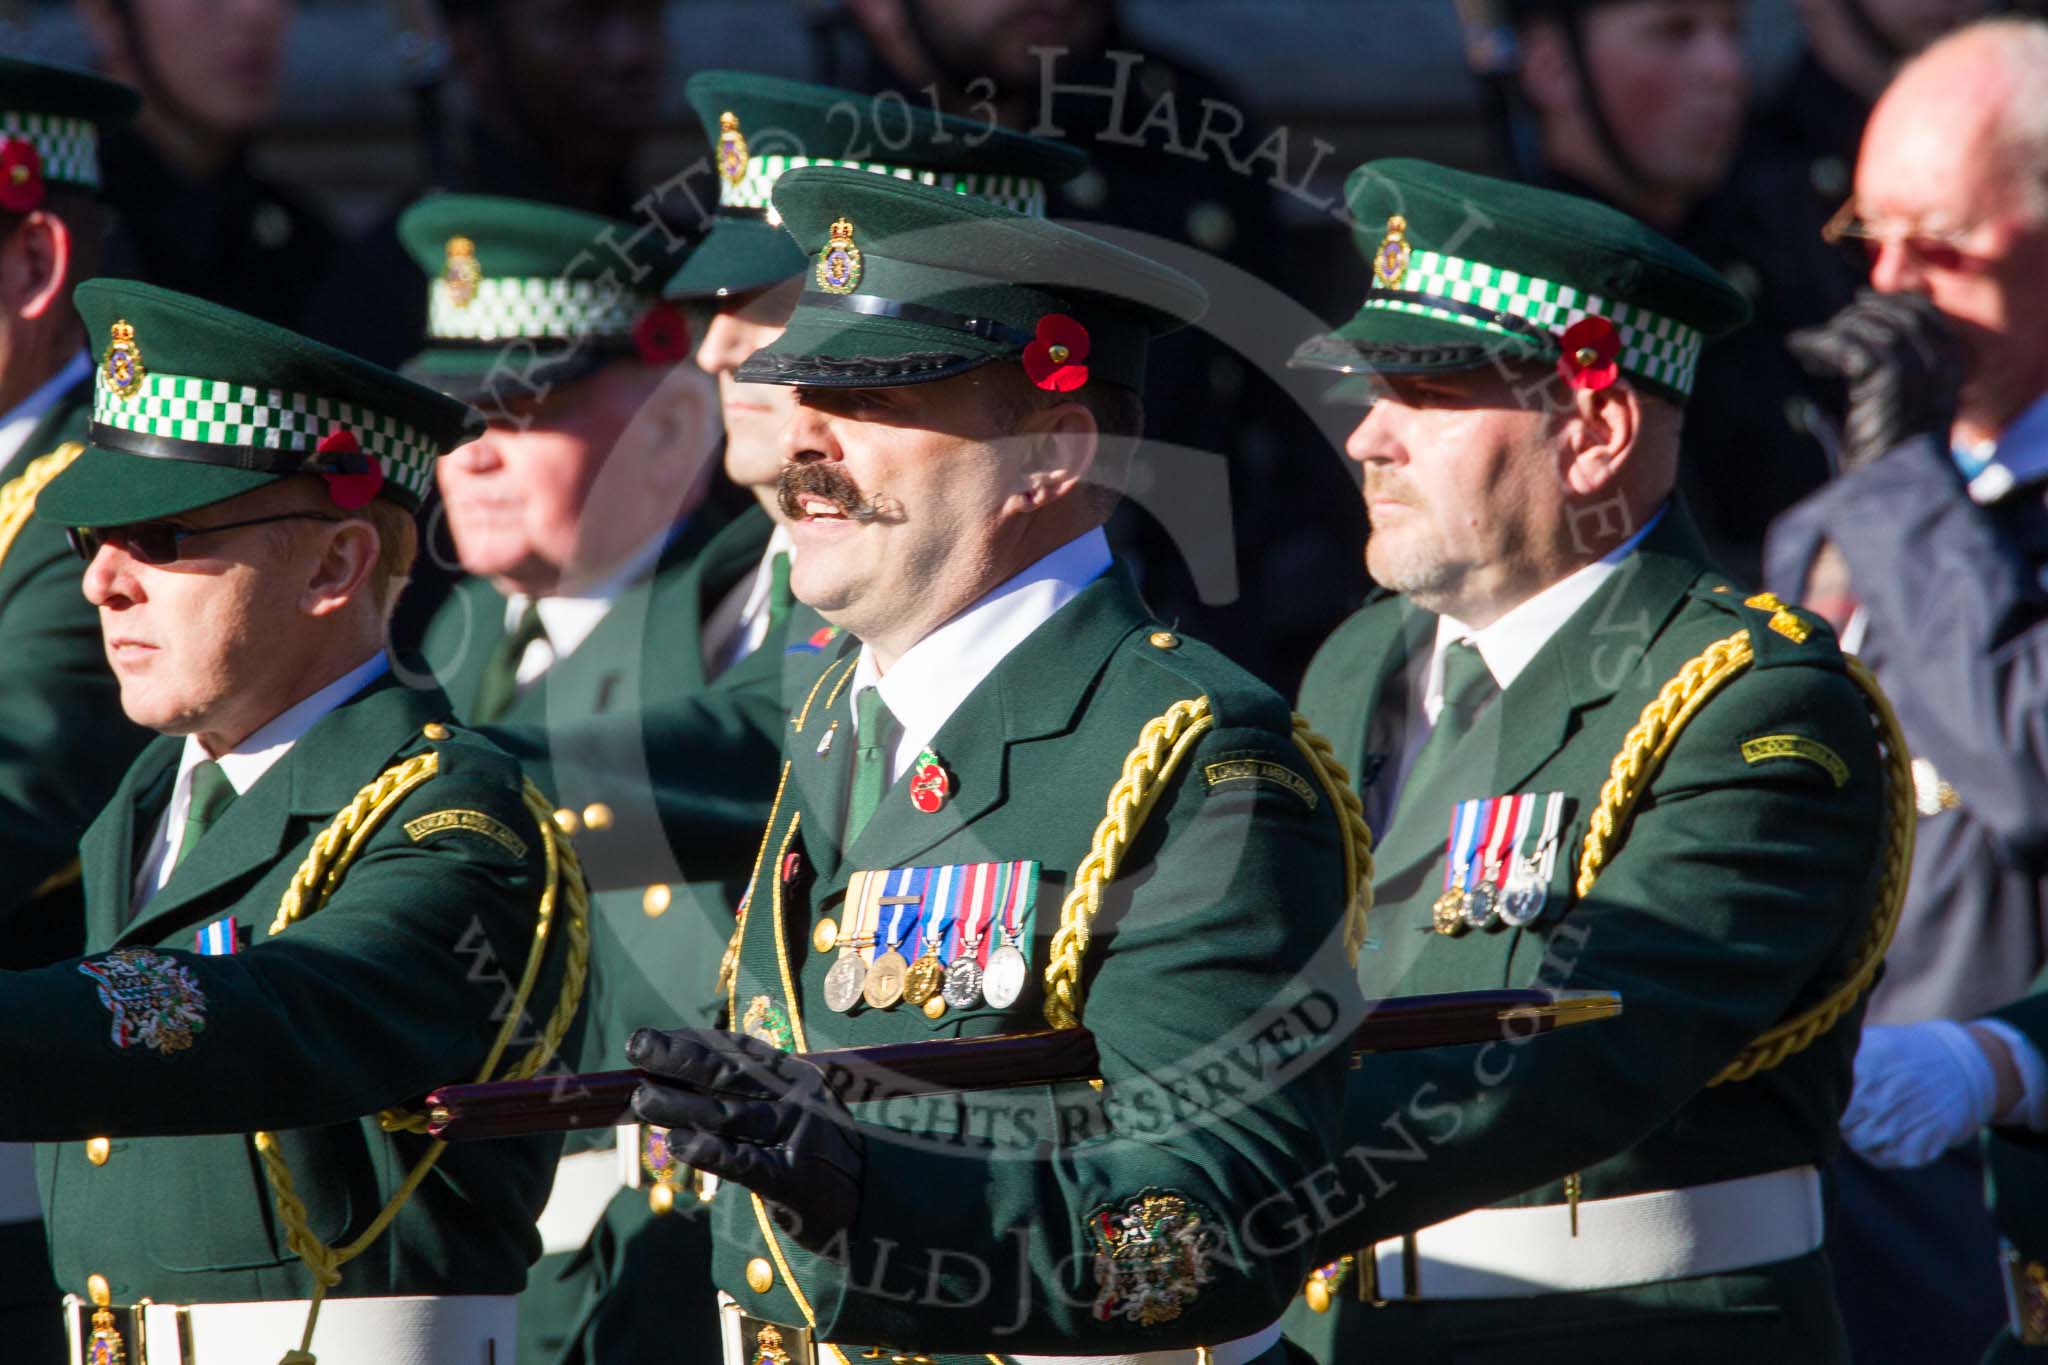 Remembrance Sunday at the Cenotaph in London 2014: Group M13 - London Ambulance Service NHS Trust.
Press stand opposite the Foreign Office building, Whitehall, London SW1,
London,
Greater London,
United Kingdom,
on 09 November 2014 at 12:16, image #2076